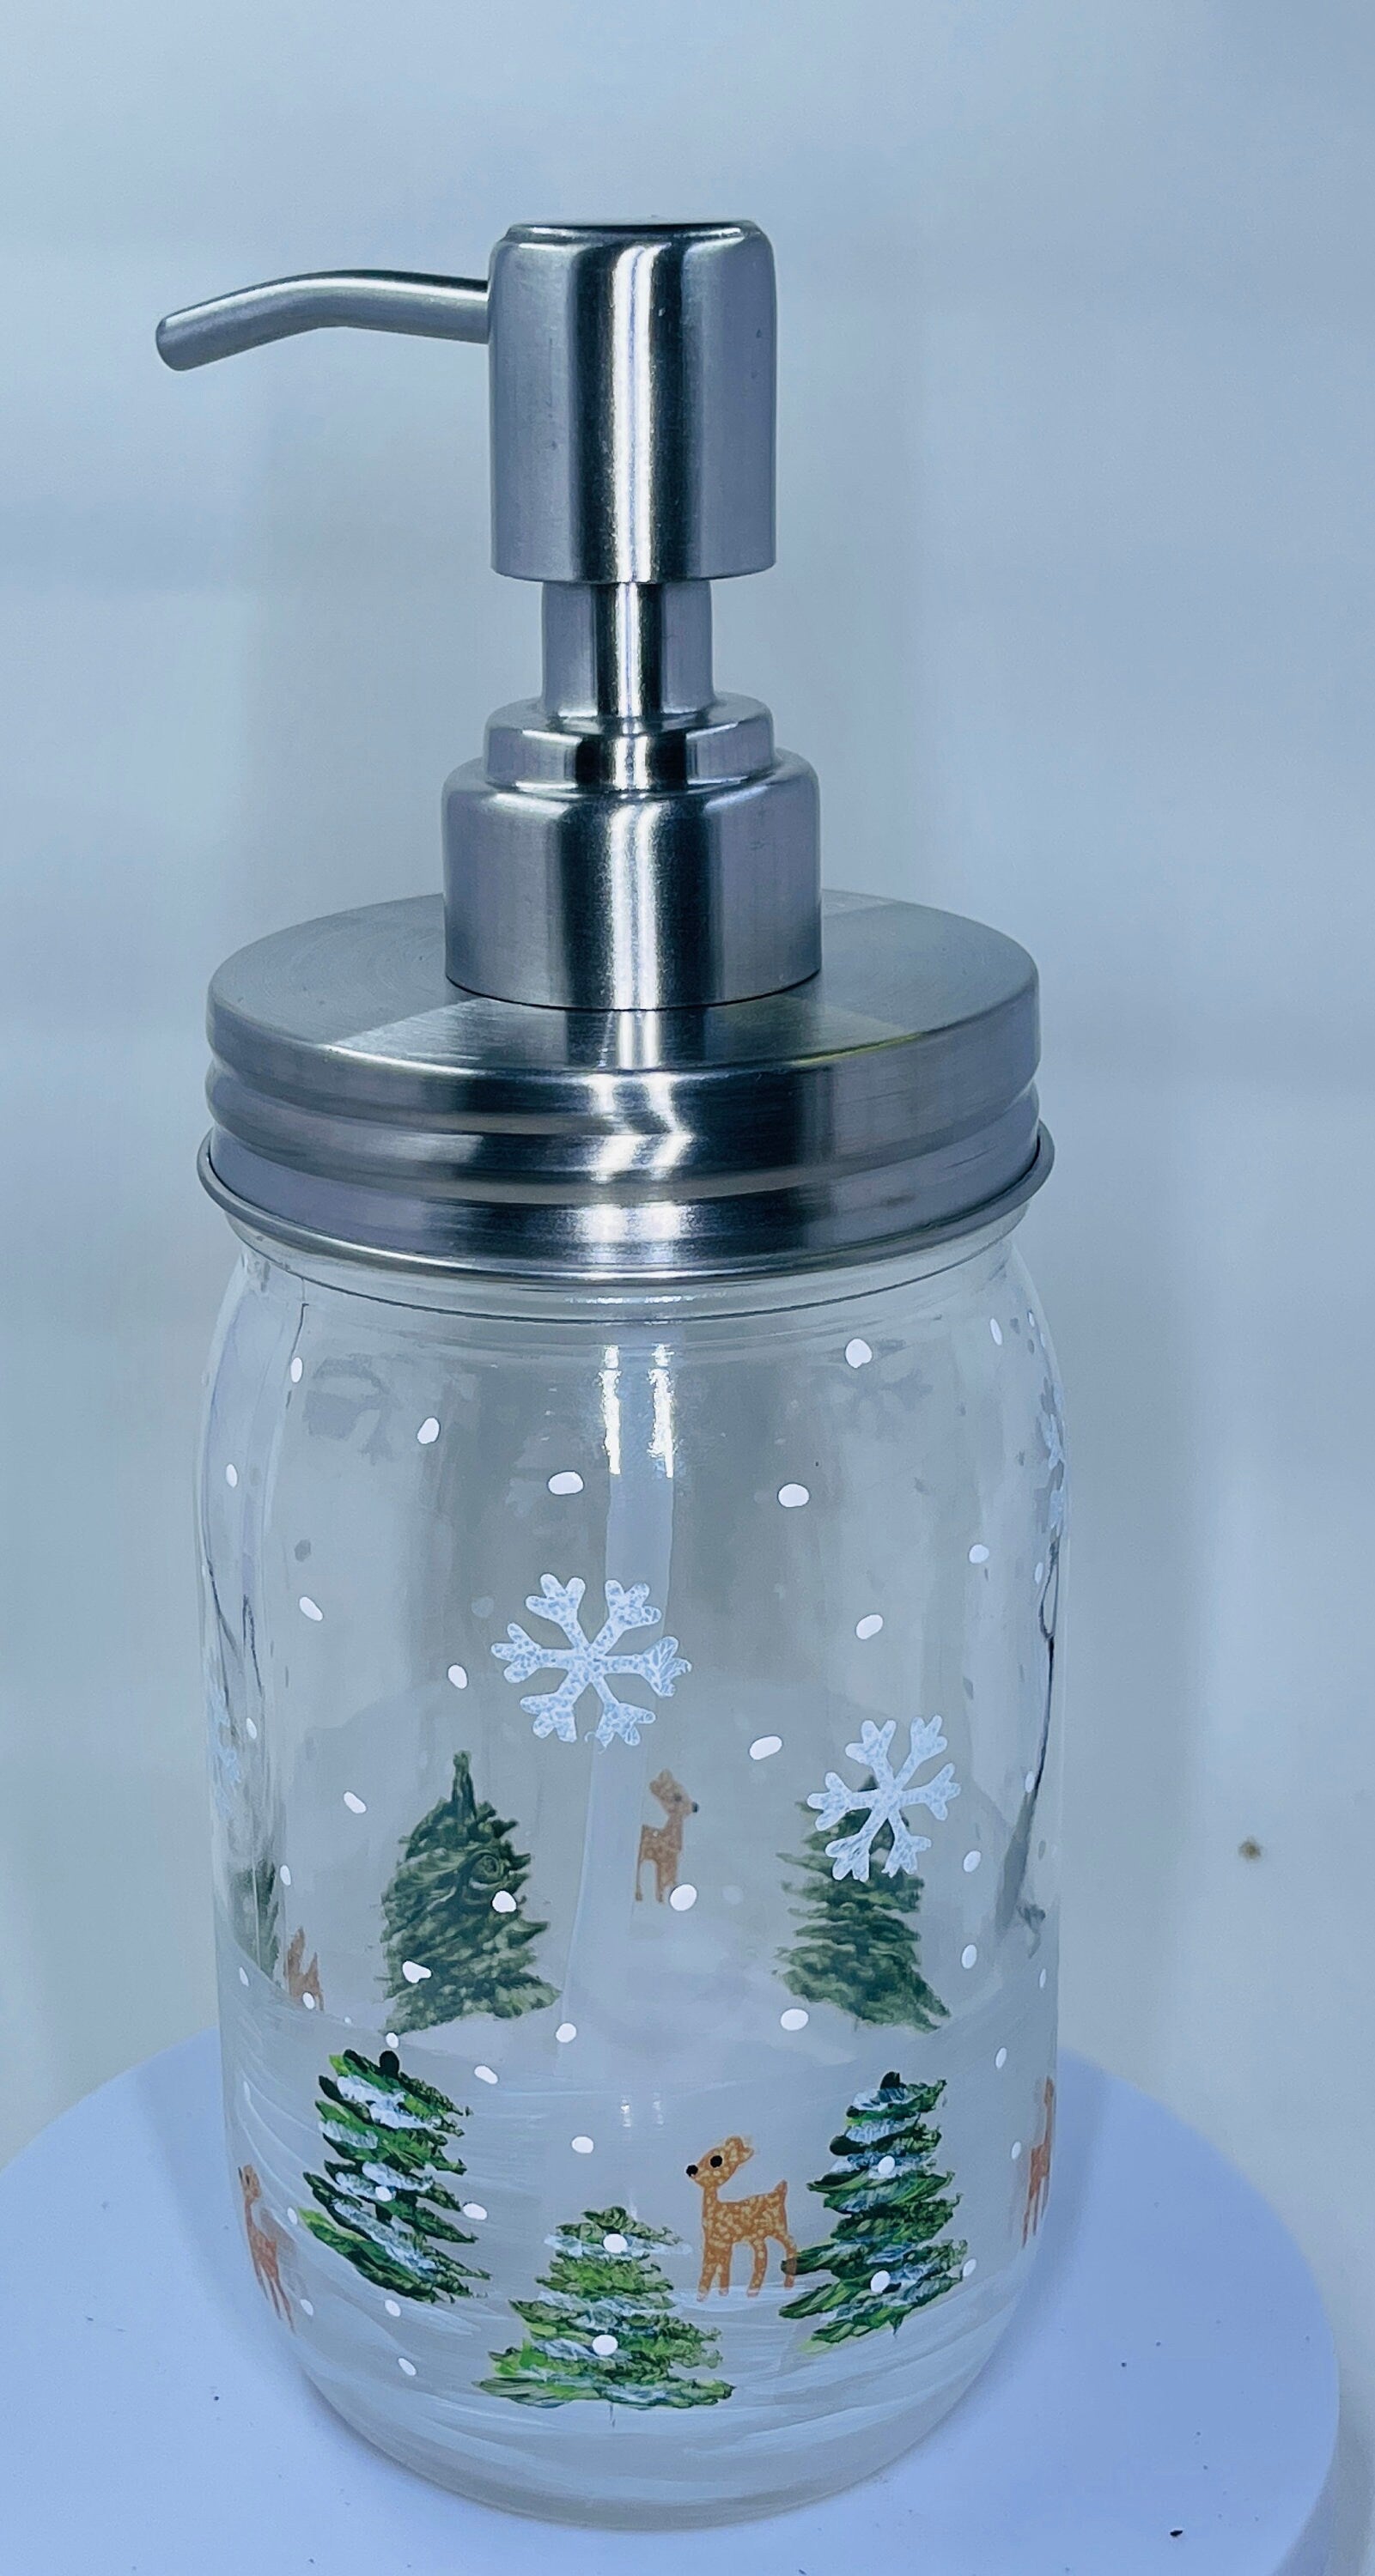 Hand Painted Reindeer in Snow Mason Jar Soap Dispenser 16 oz with stainless steel soap pump